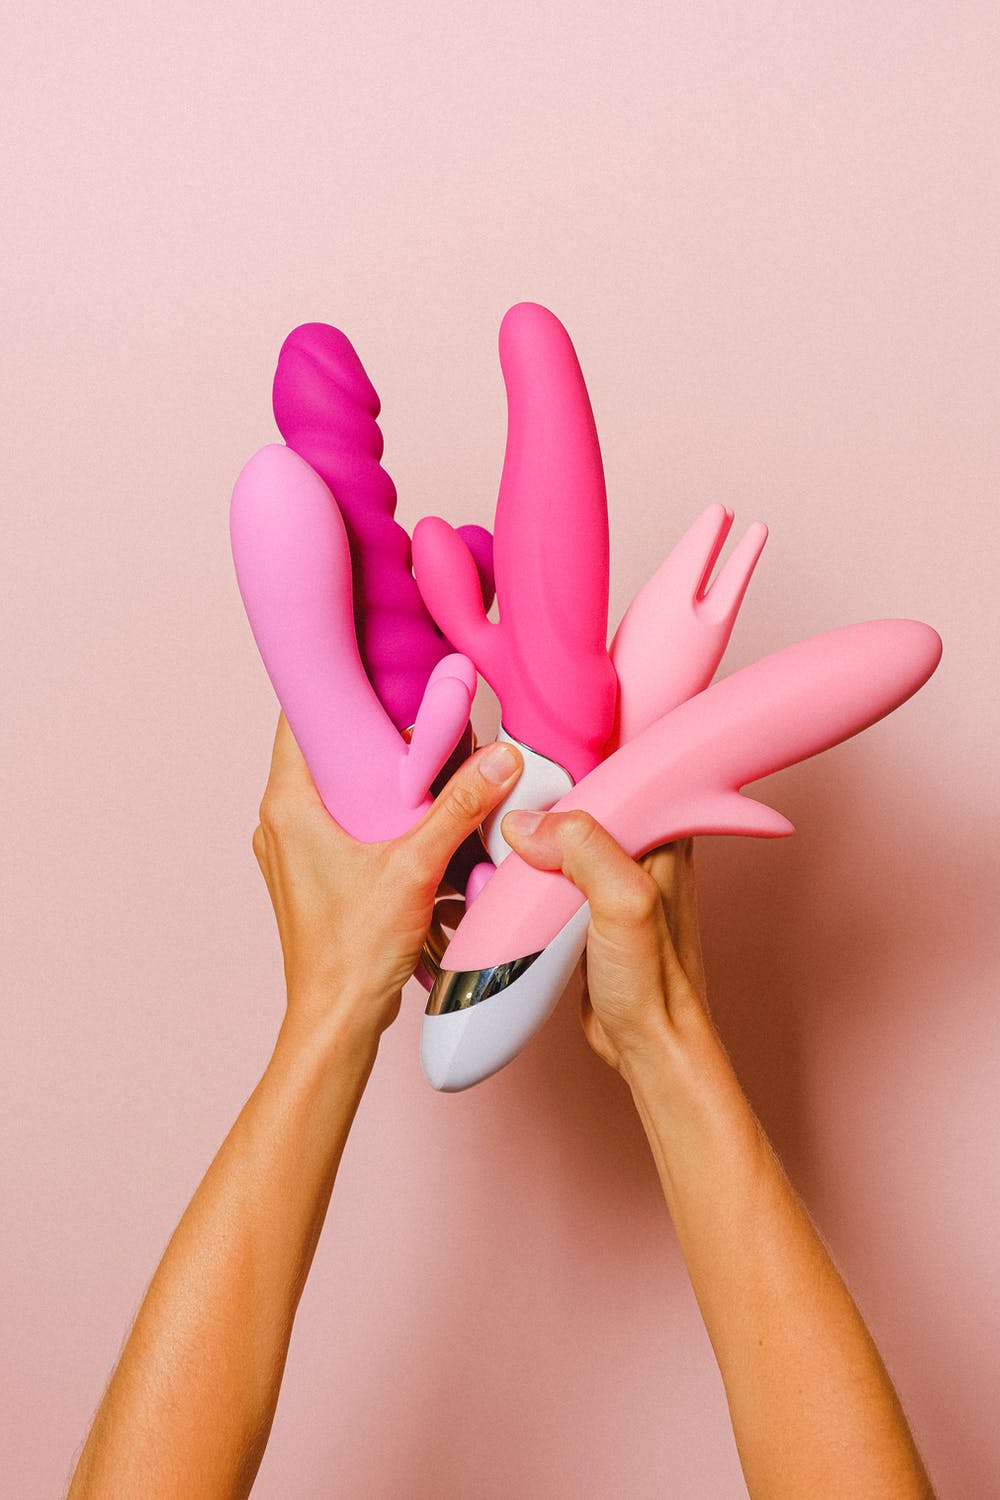 Is it weird to give your friend a sex toy as a gift? photo